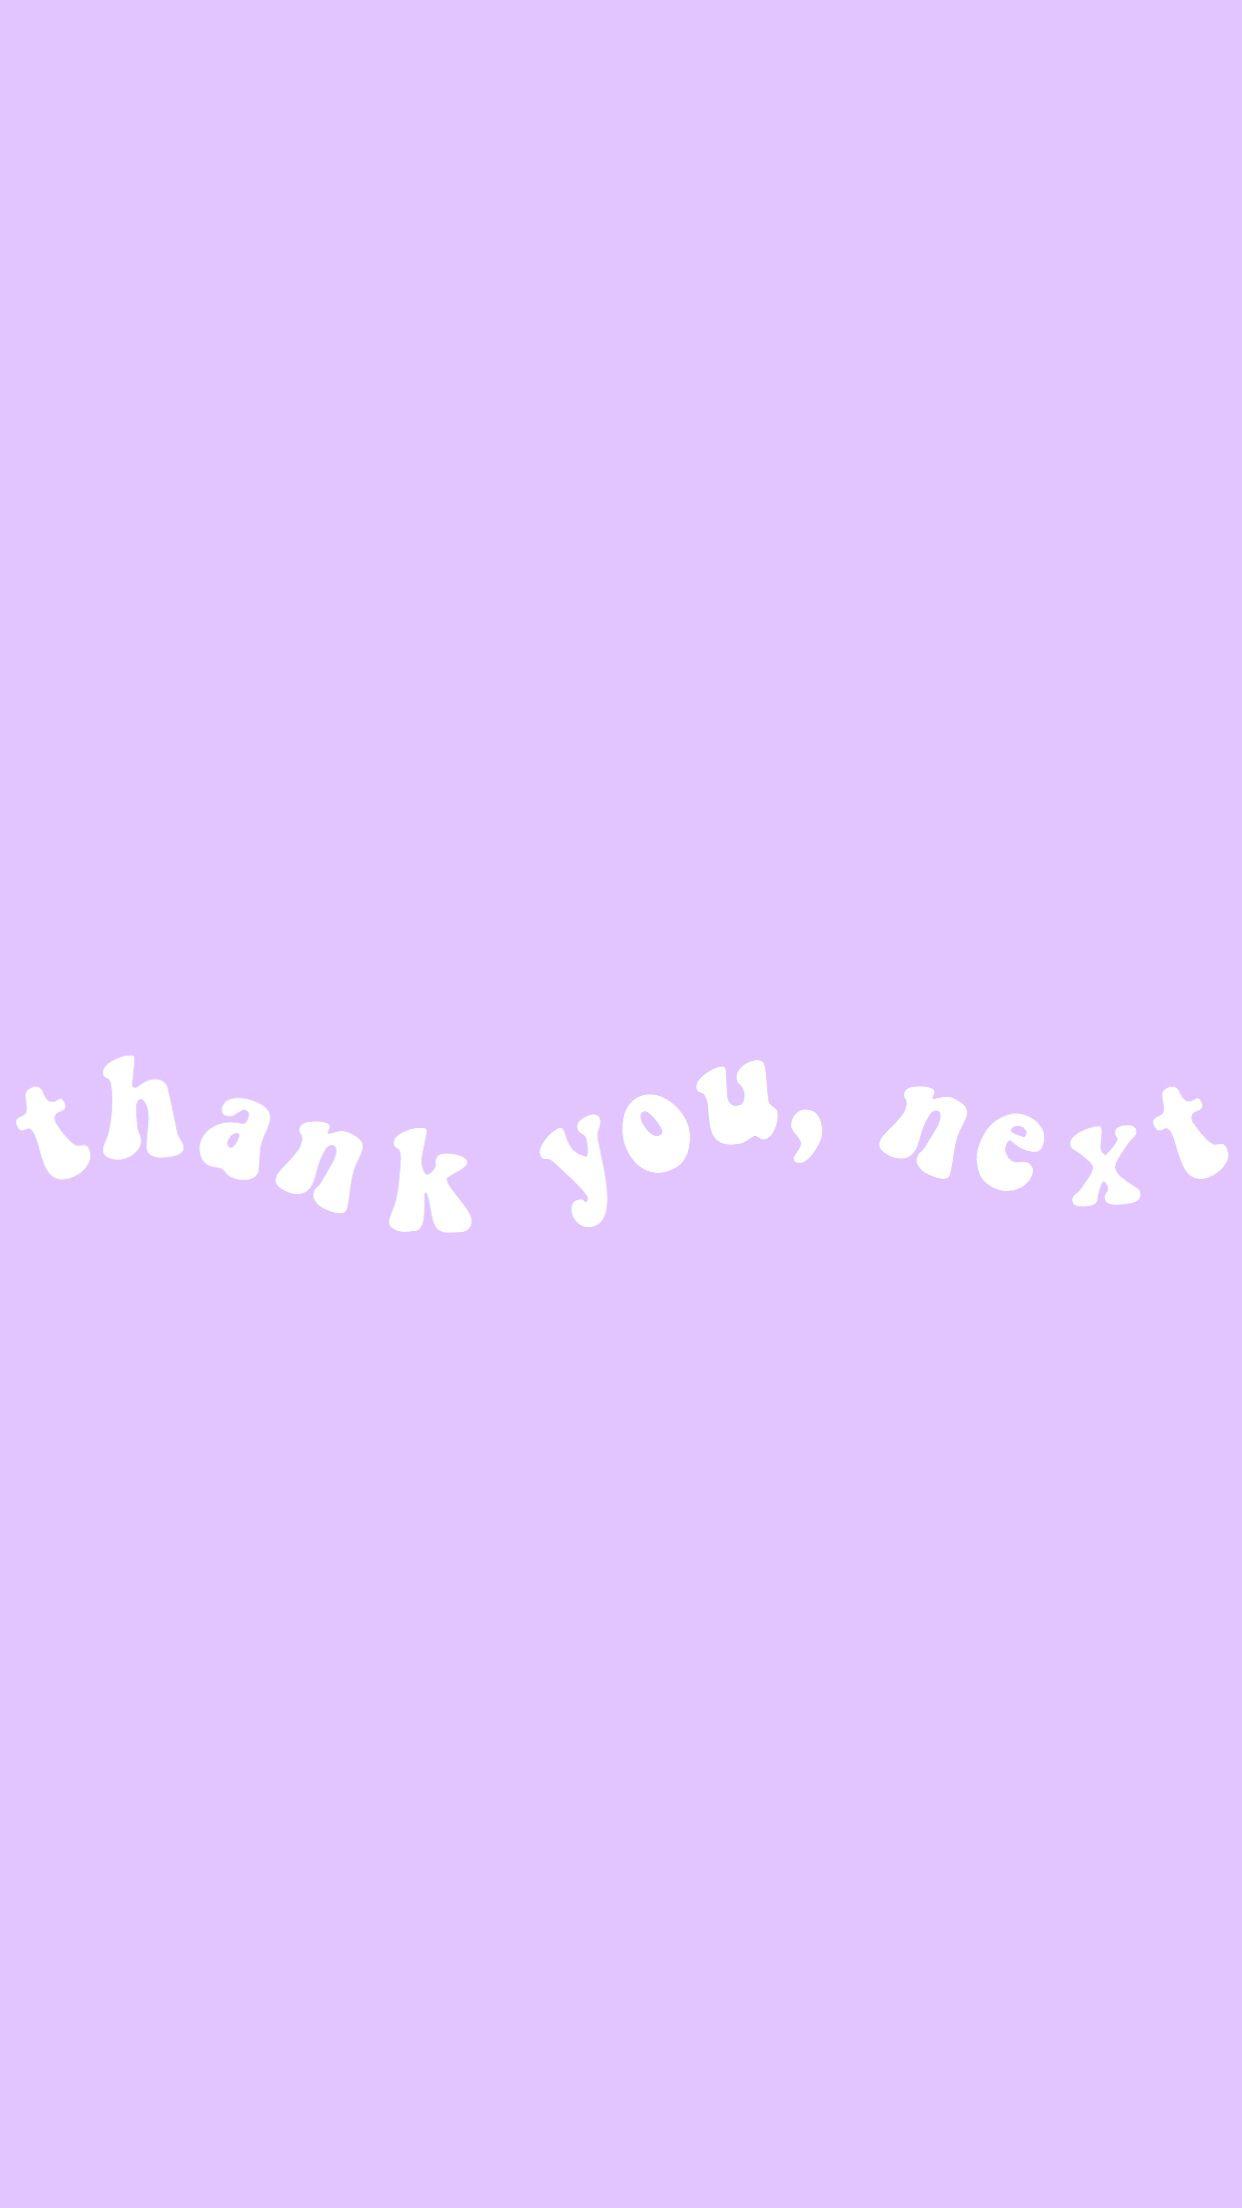 thank you, next. Purple wallpaper iphone, Purple quotes, Pink wallpaper iphone